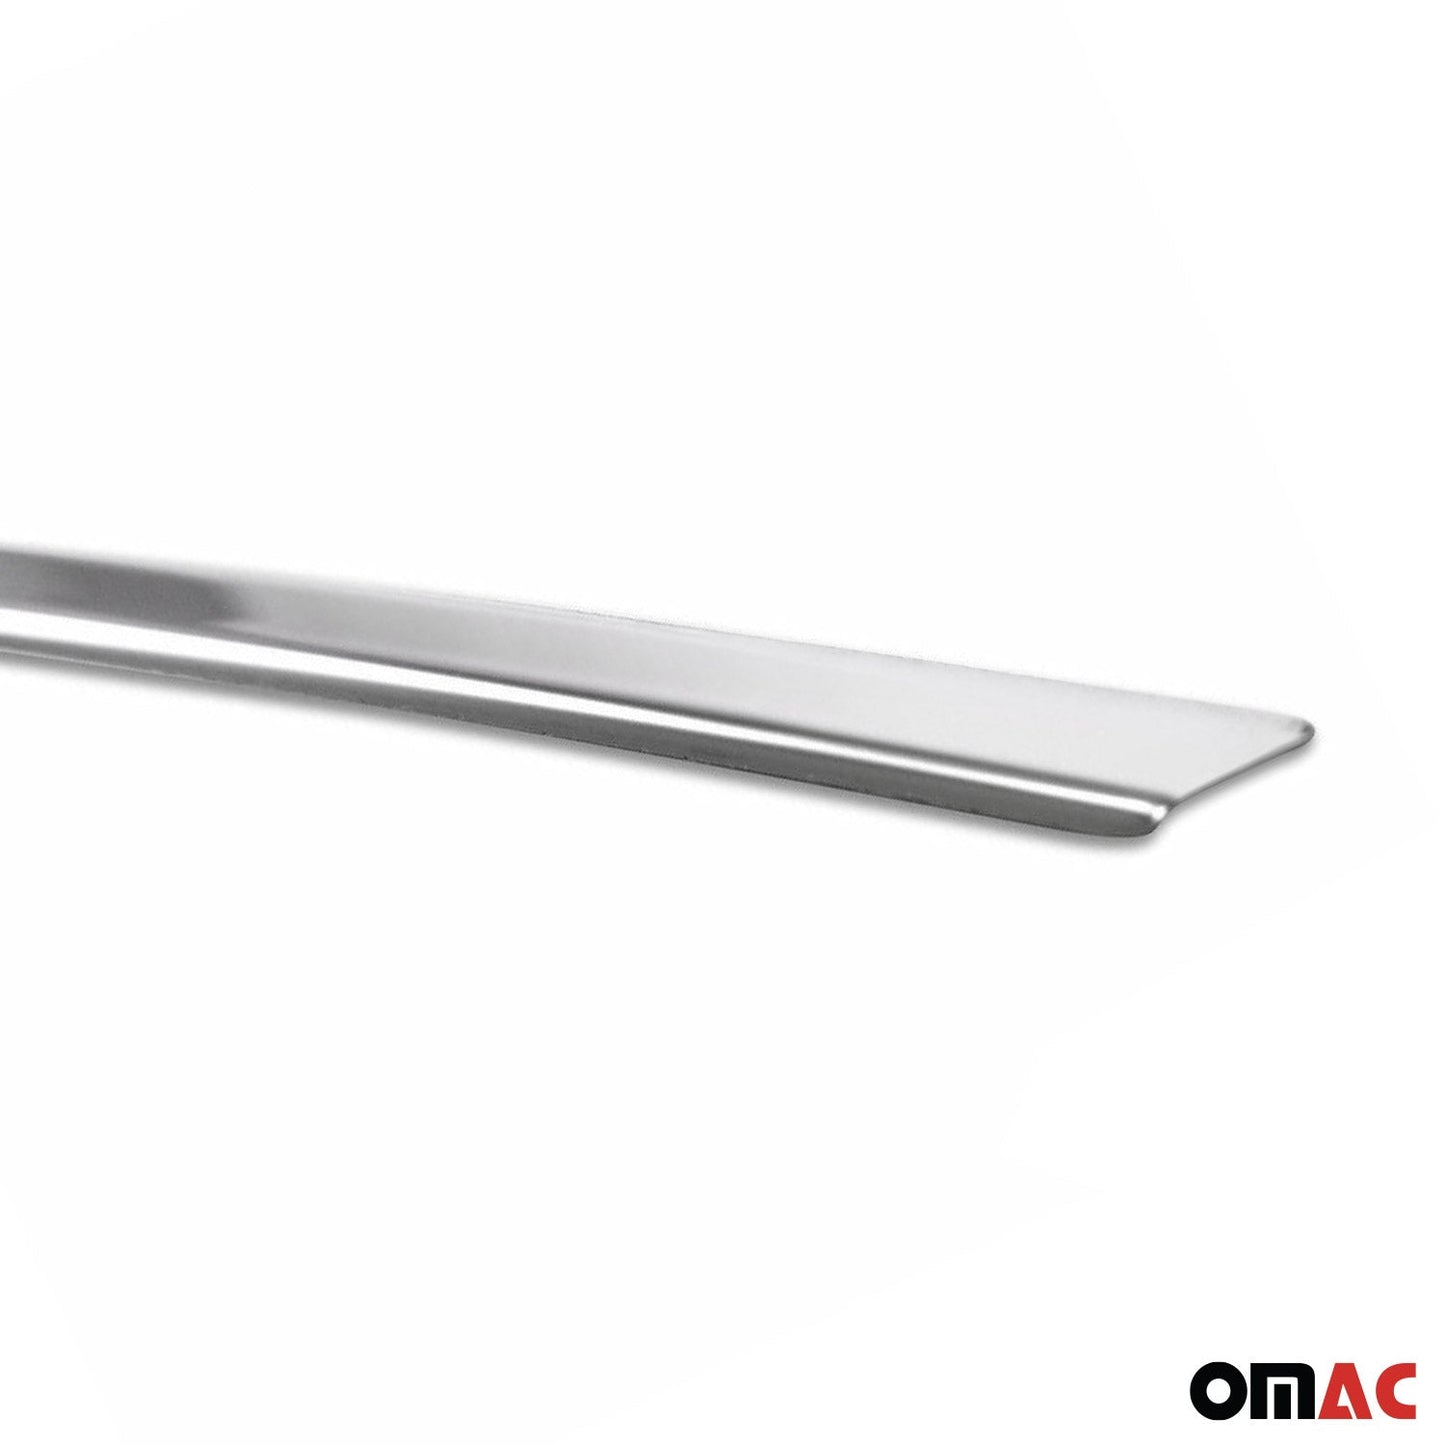 OMAC Trunk Tailgate Door Handle Cover for Audi A3 Sportback 2008-2013 Steel Silver A007362